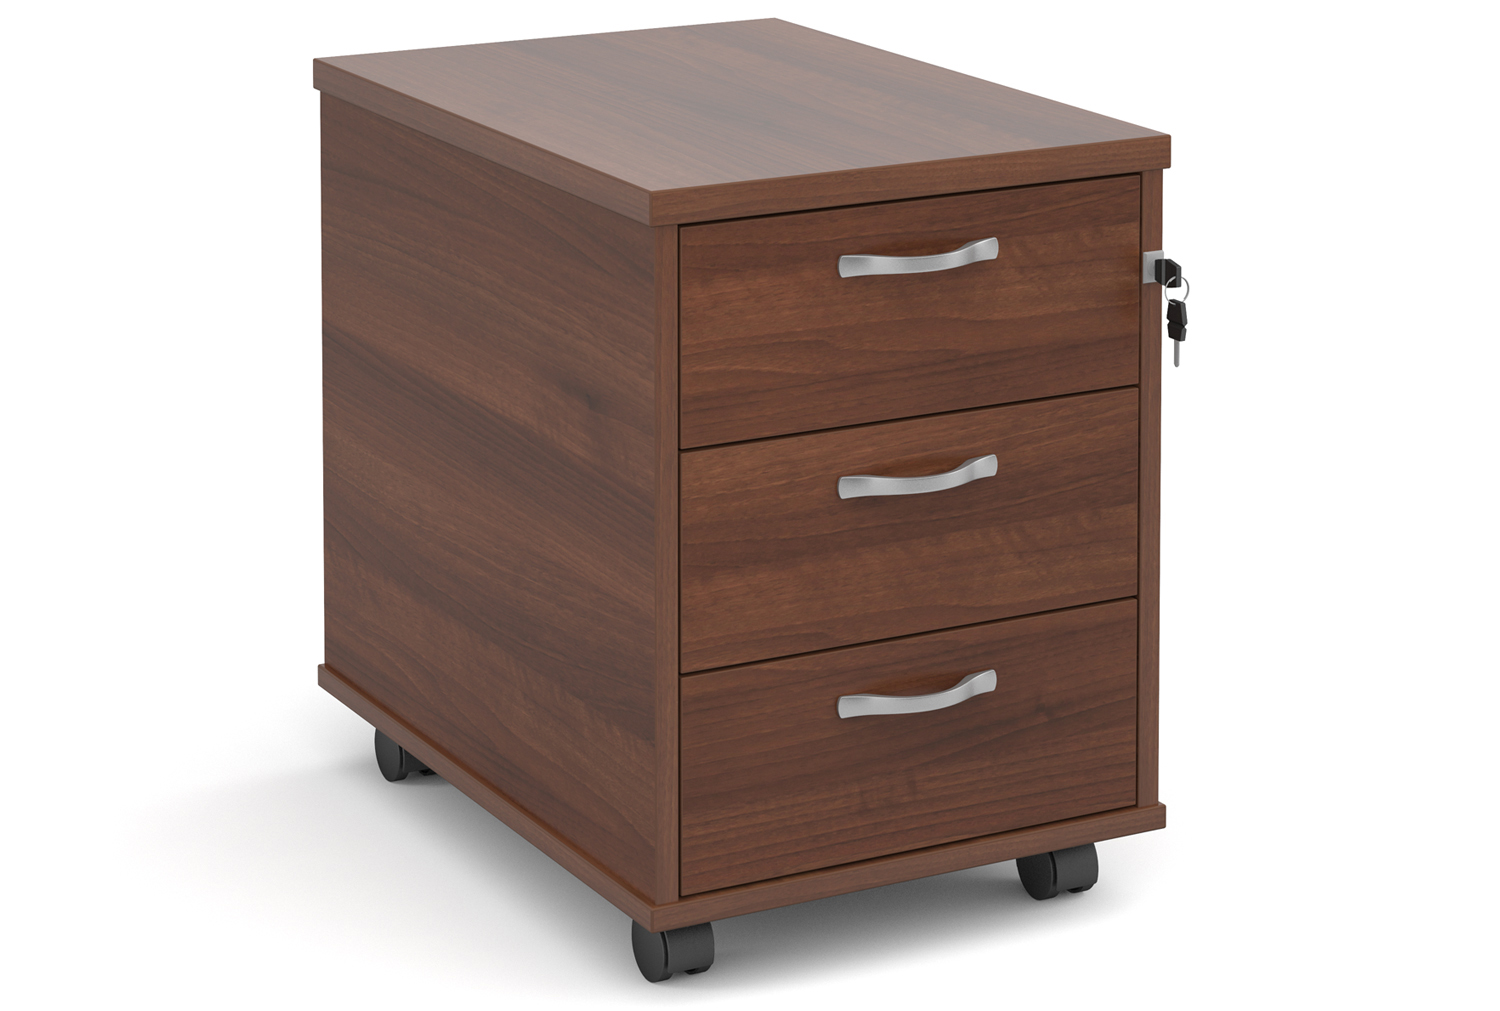 Thrifty Next-Day Mobile Pedestal Walnut, 3 Drawer - 43wx60dx57h (cm), Express Delivery